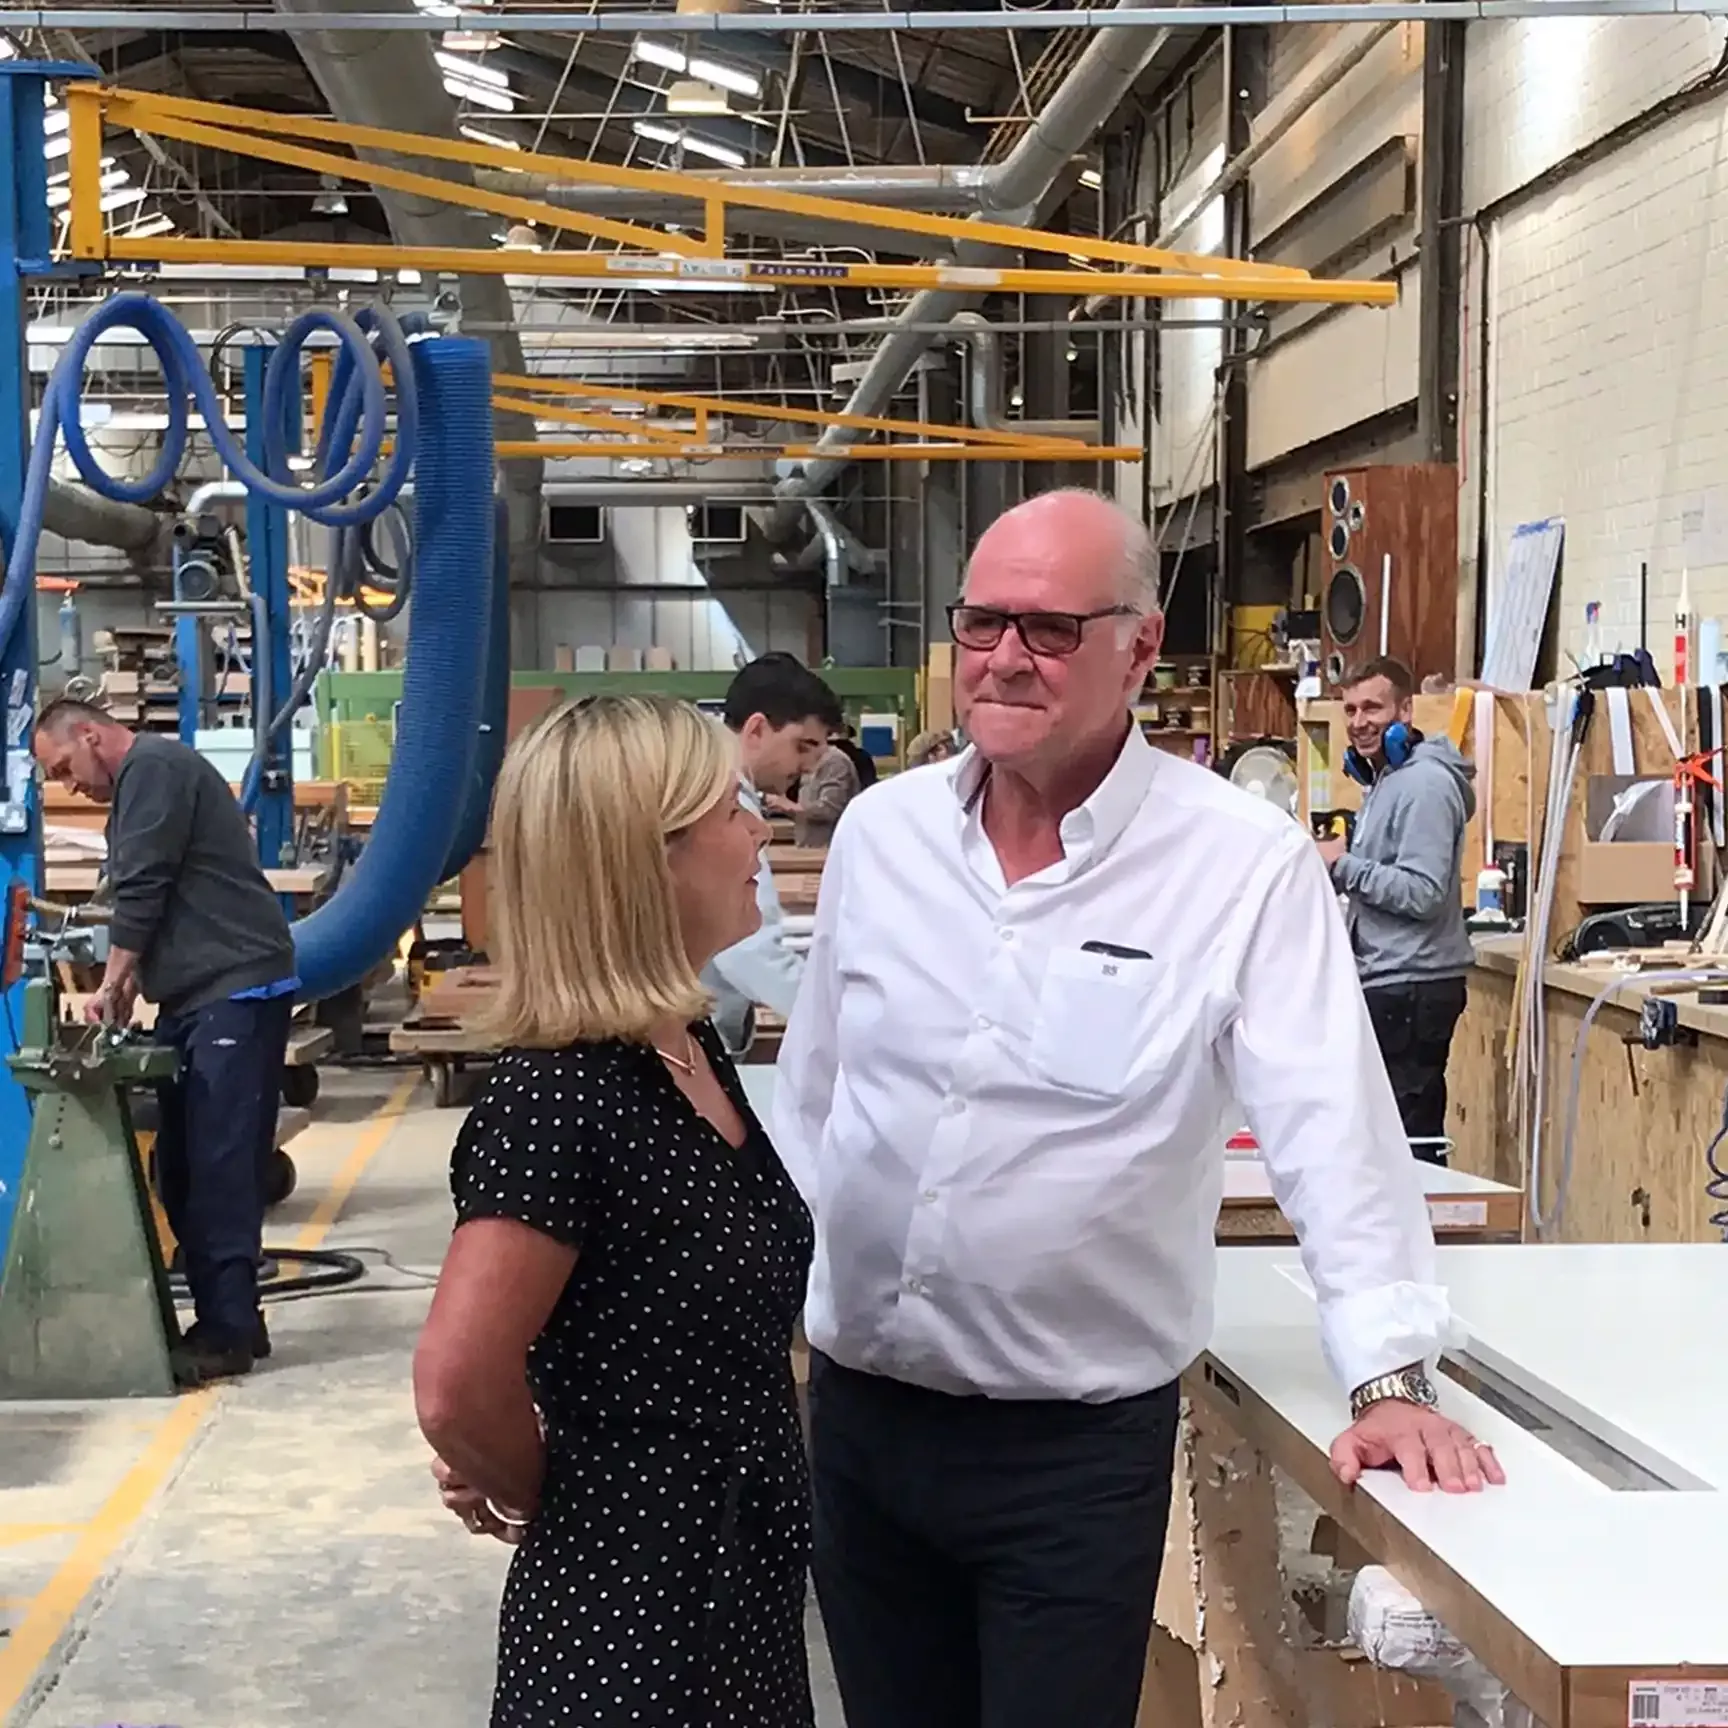 MD Robyn Holmes of Prime Appointments visiting Simon Shadbolt of Shadbolts, whilst speaking about the local recruitment market in East Anglia